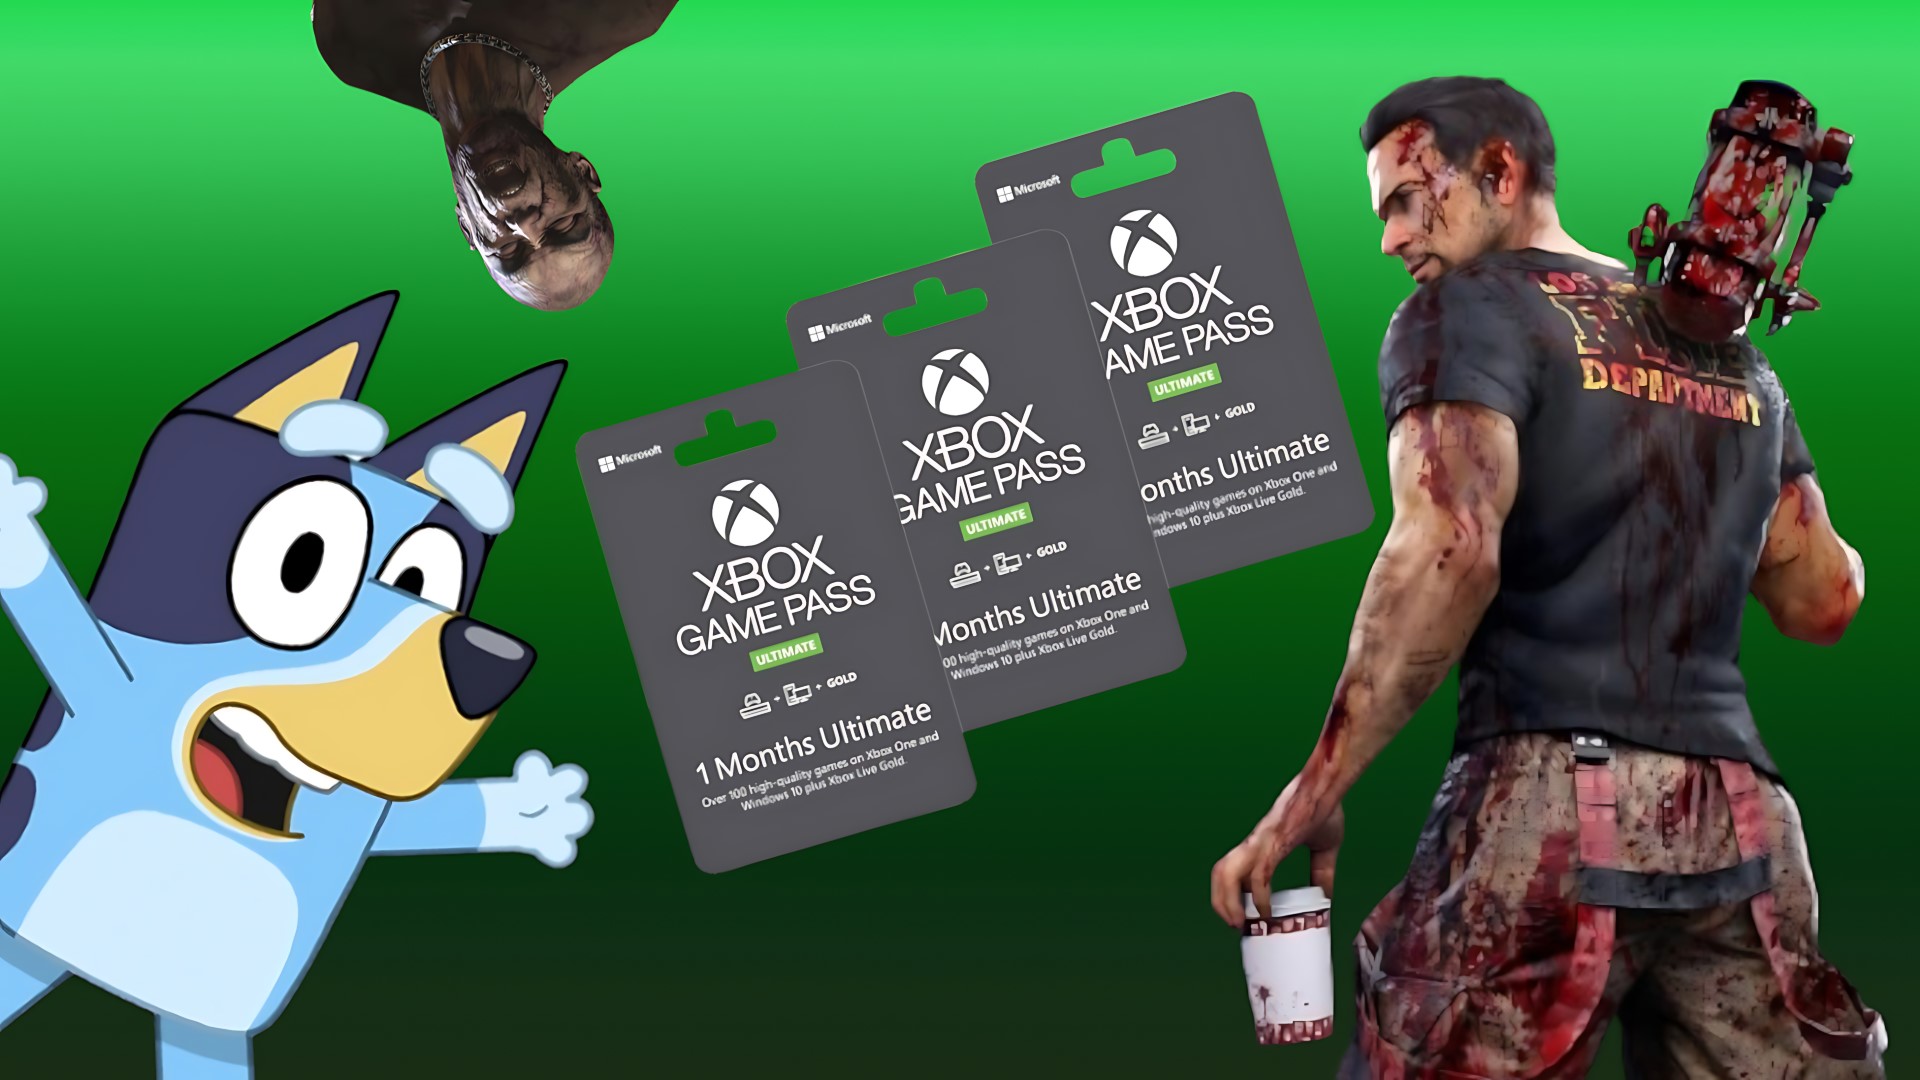 This is the best price I've seen for Xbox Game Pass Ultimate in a long time — but there's a catch